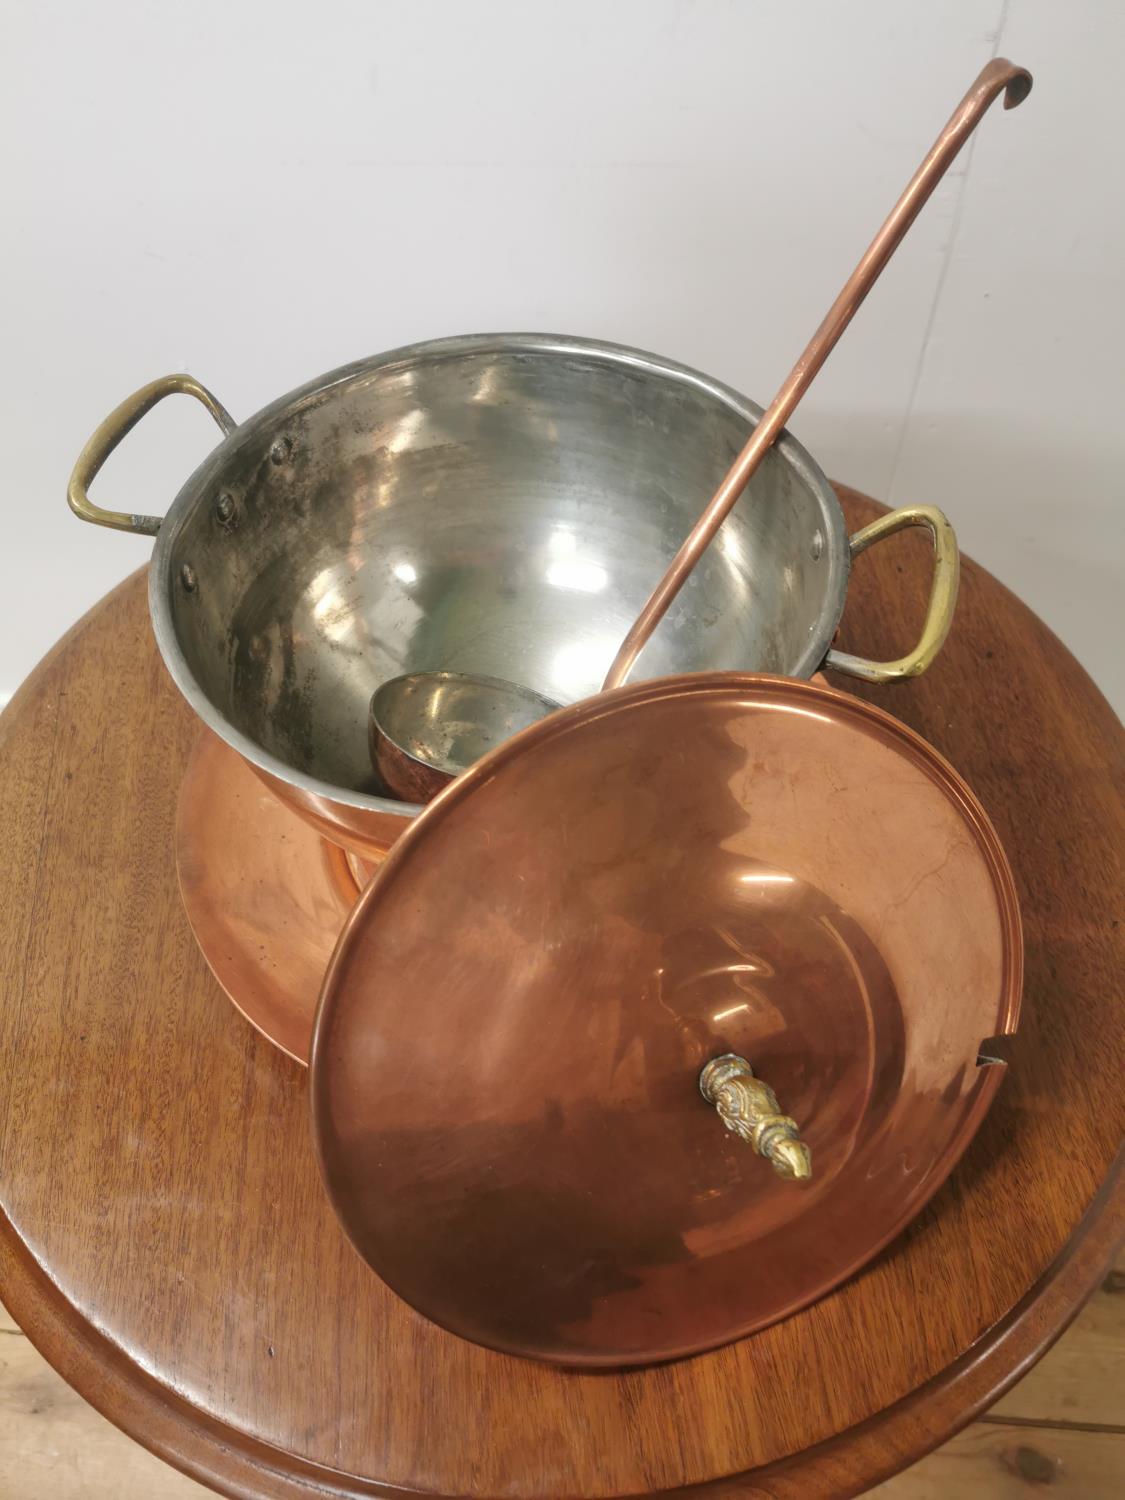 Early 20th. C. brass and copper lidded tureen with ladle. { cm H X D57cm W } - Image 3 of 3